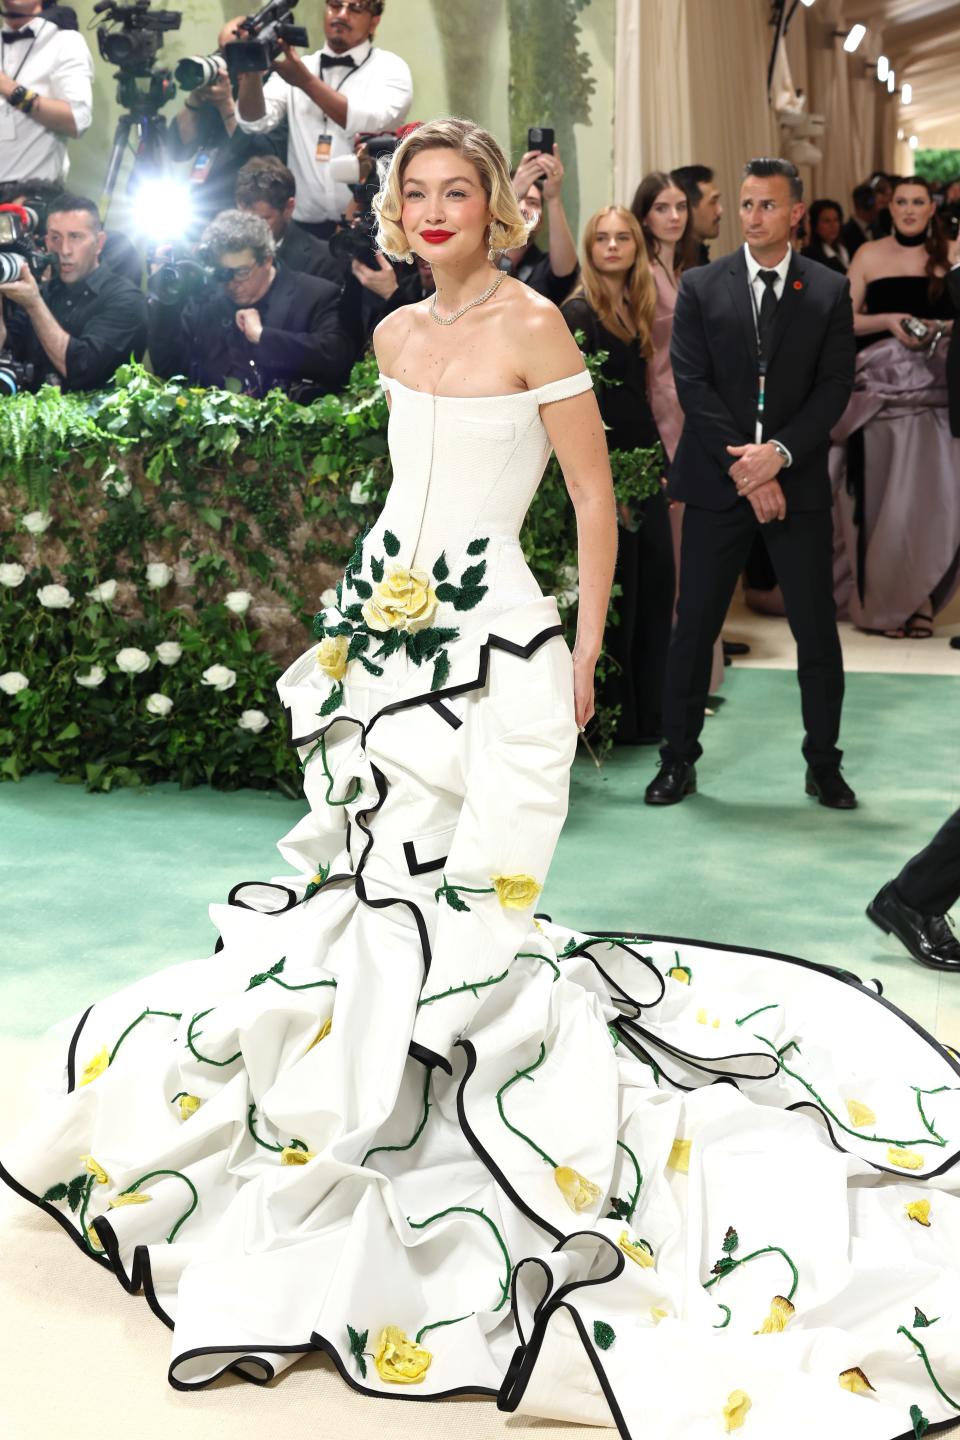 Gigi Hadid radiated in a floor-length white gown by Thom Browne.